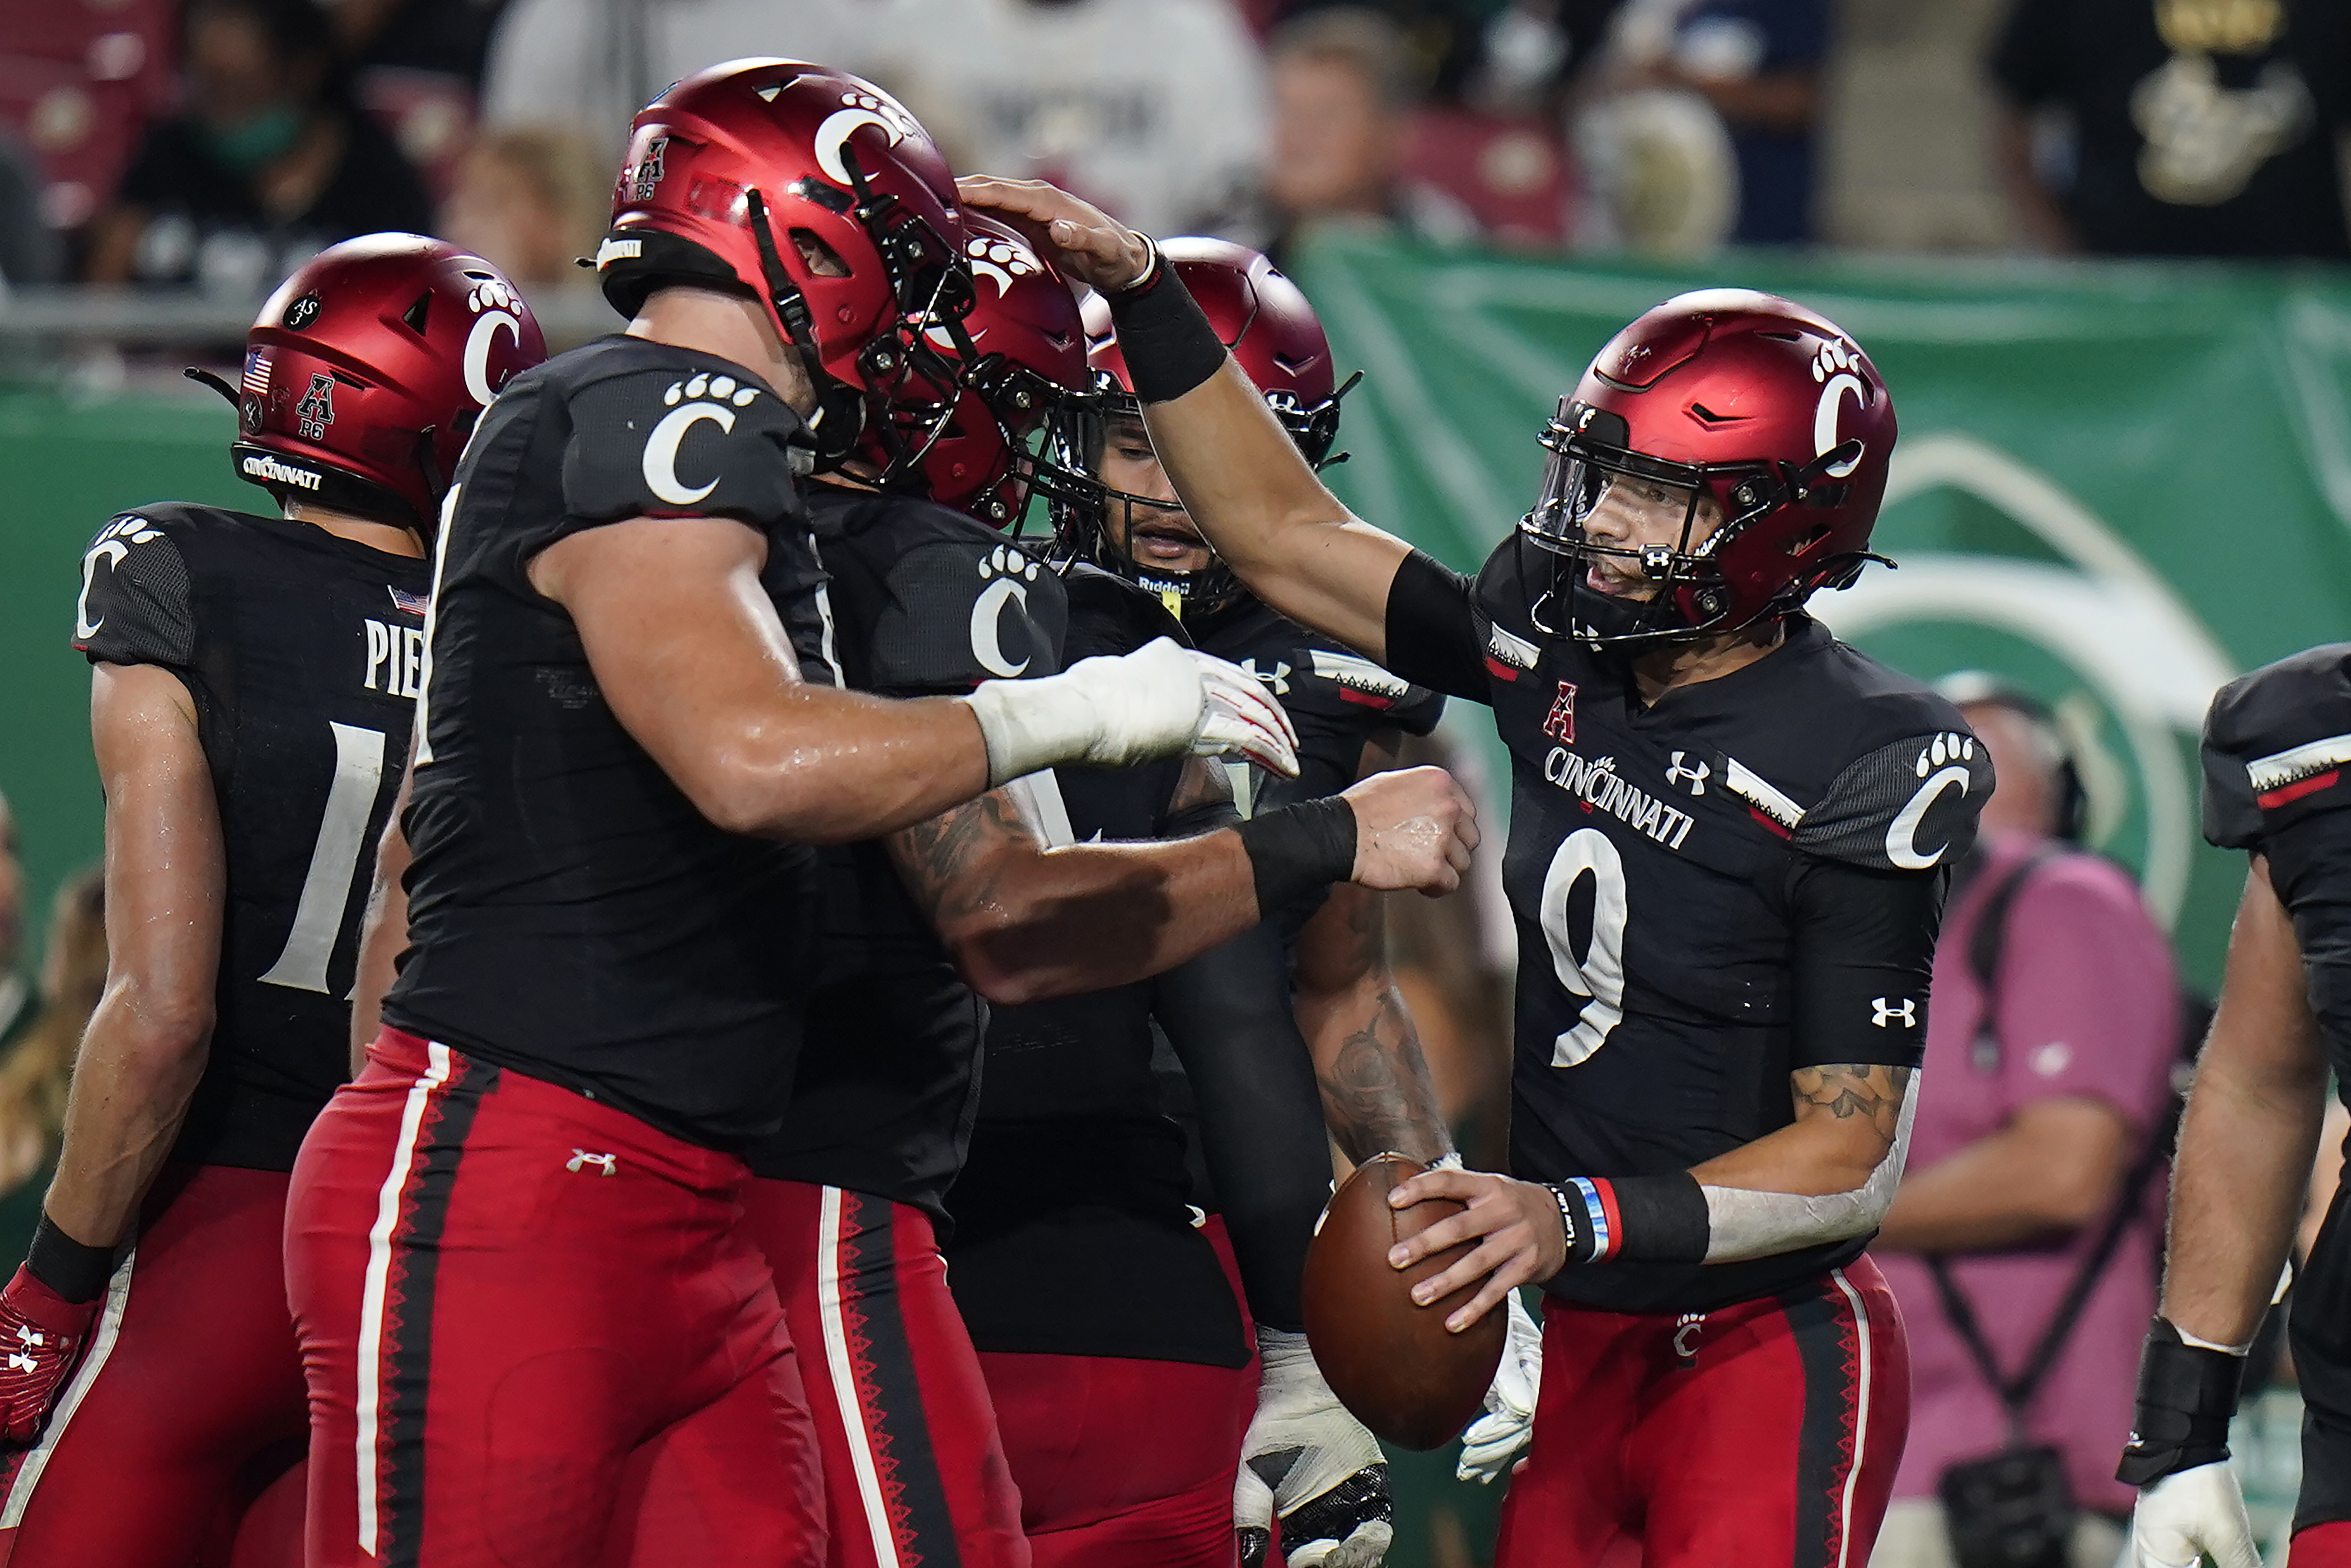 Cincinnati Bearcats football moves up to No. 20 in latest AP Top